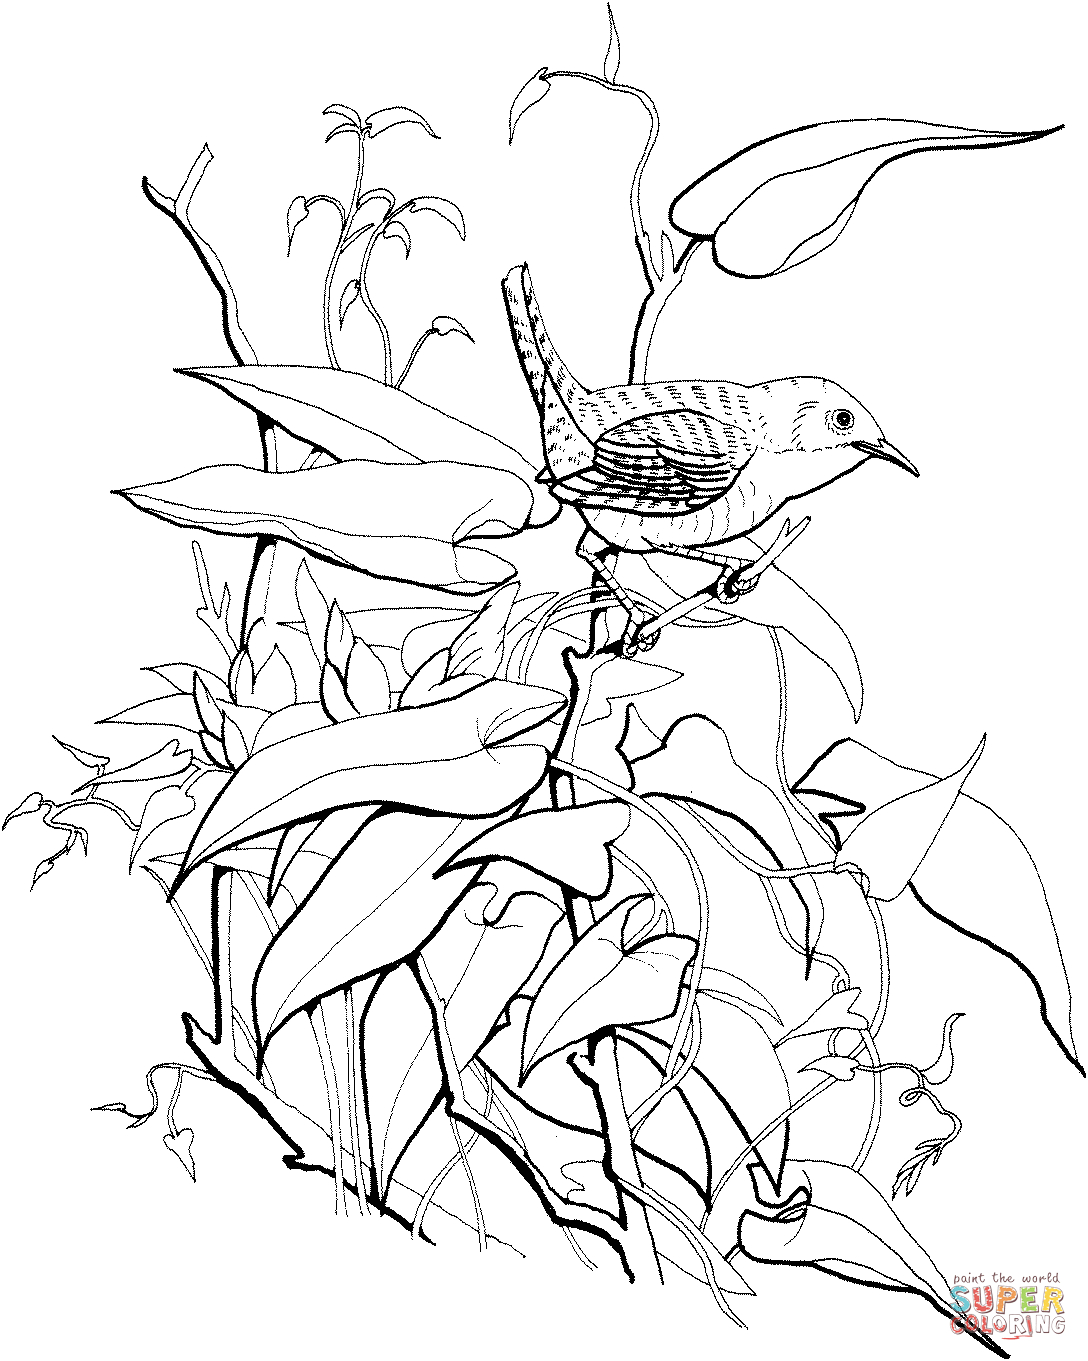 Carolina Wren Coloring Page Wren Coloring Pages Free Coloring Pages